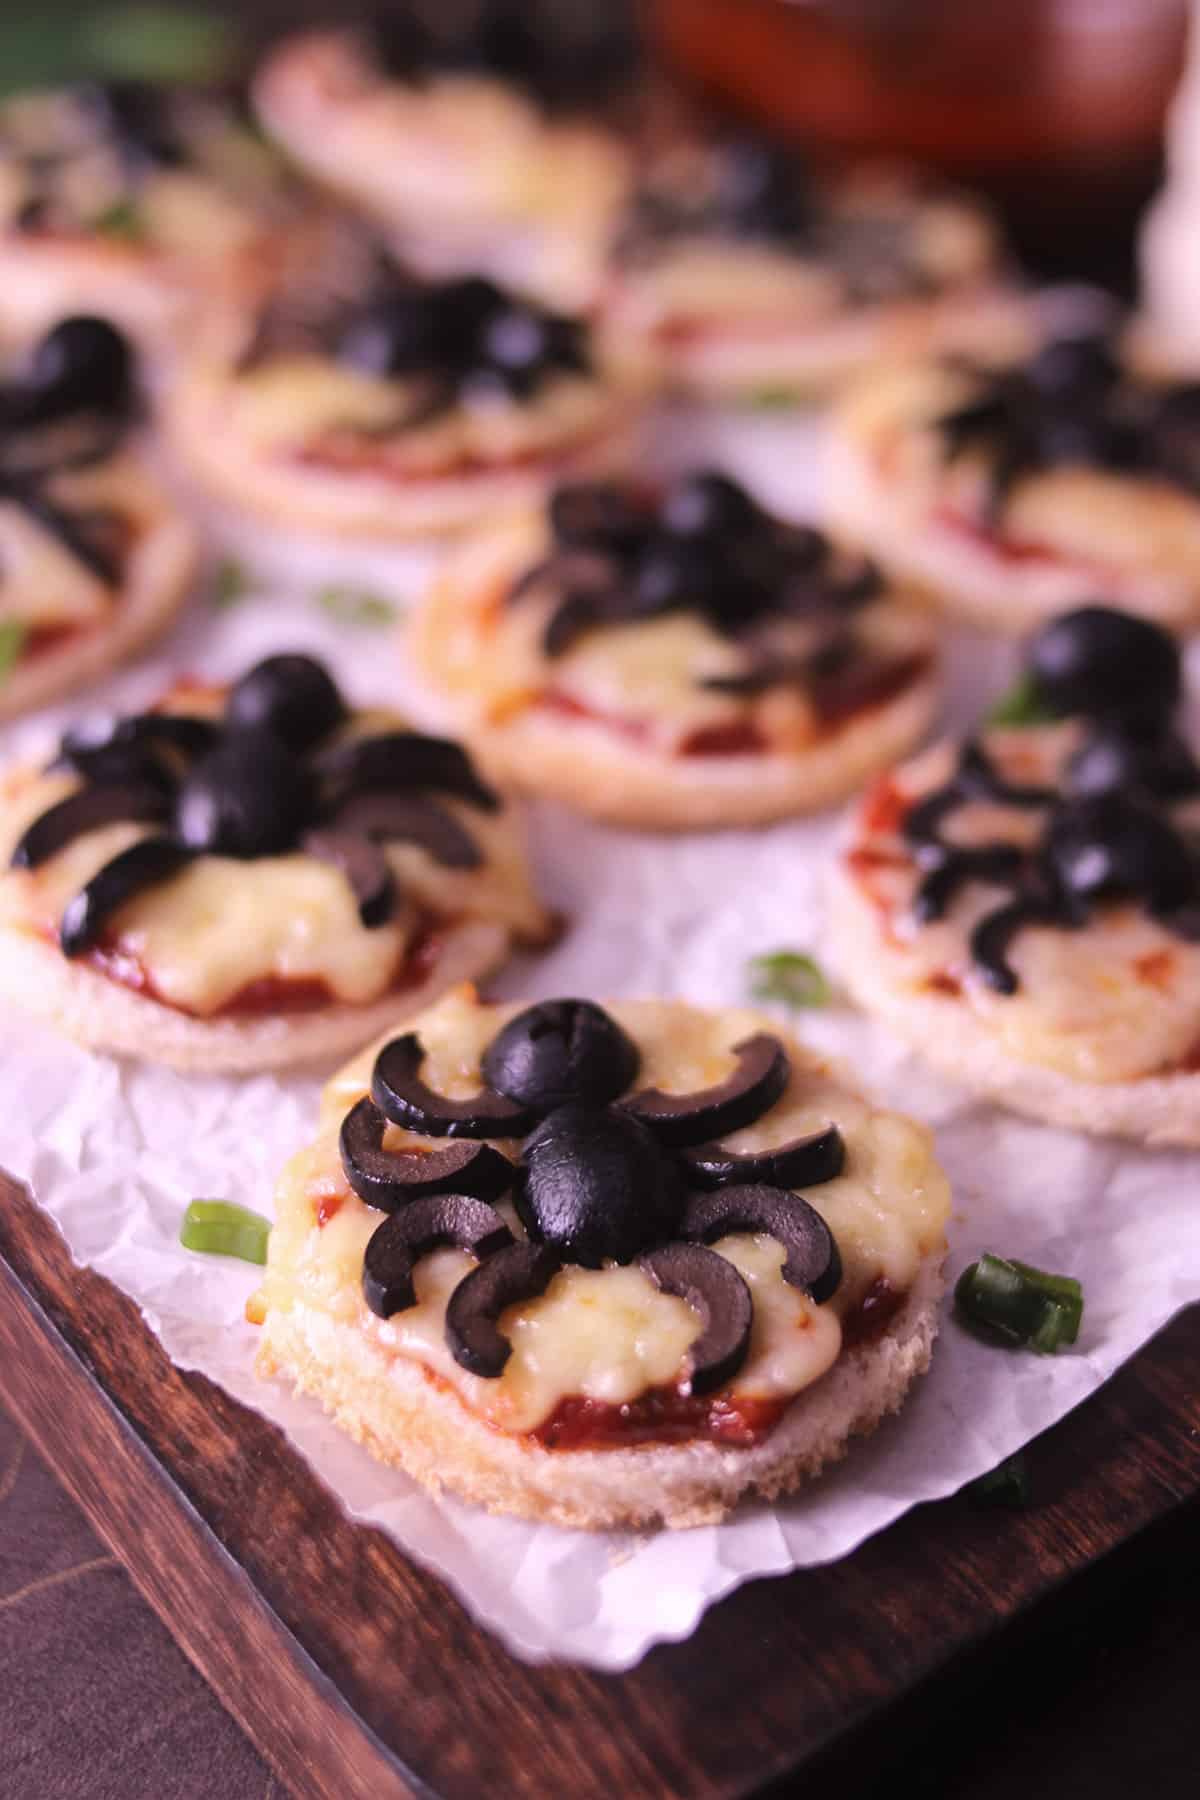 Halloween themed pizza with bread, mozzarella cheese, pizza sauce and black olives.